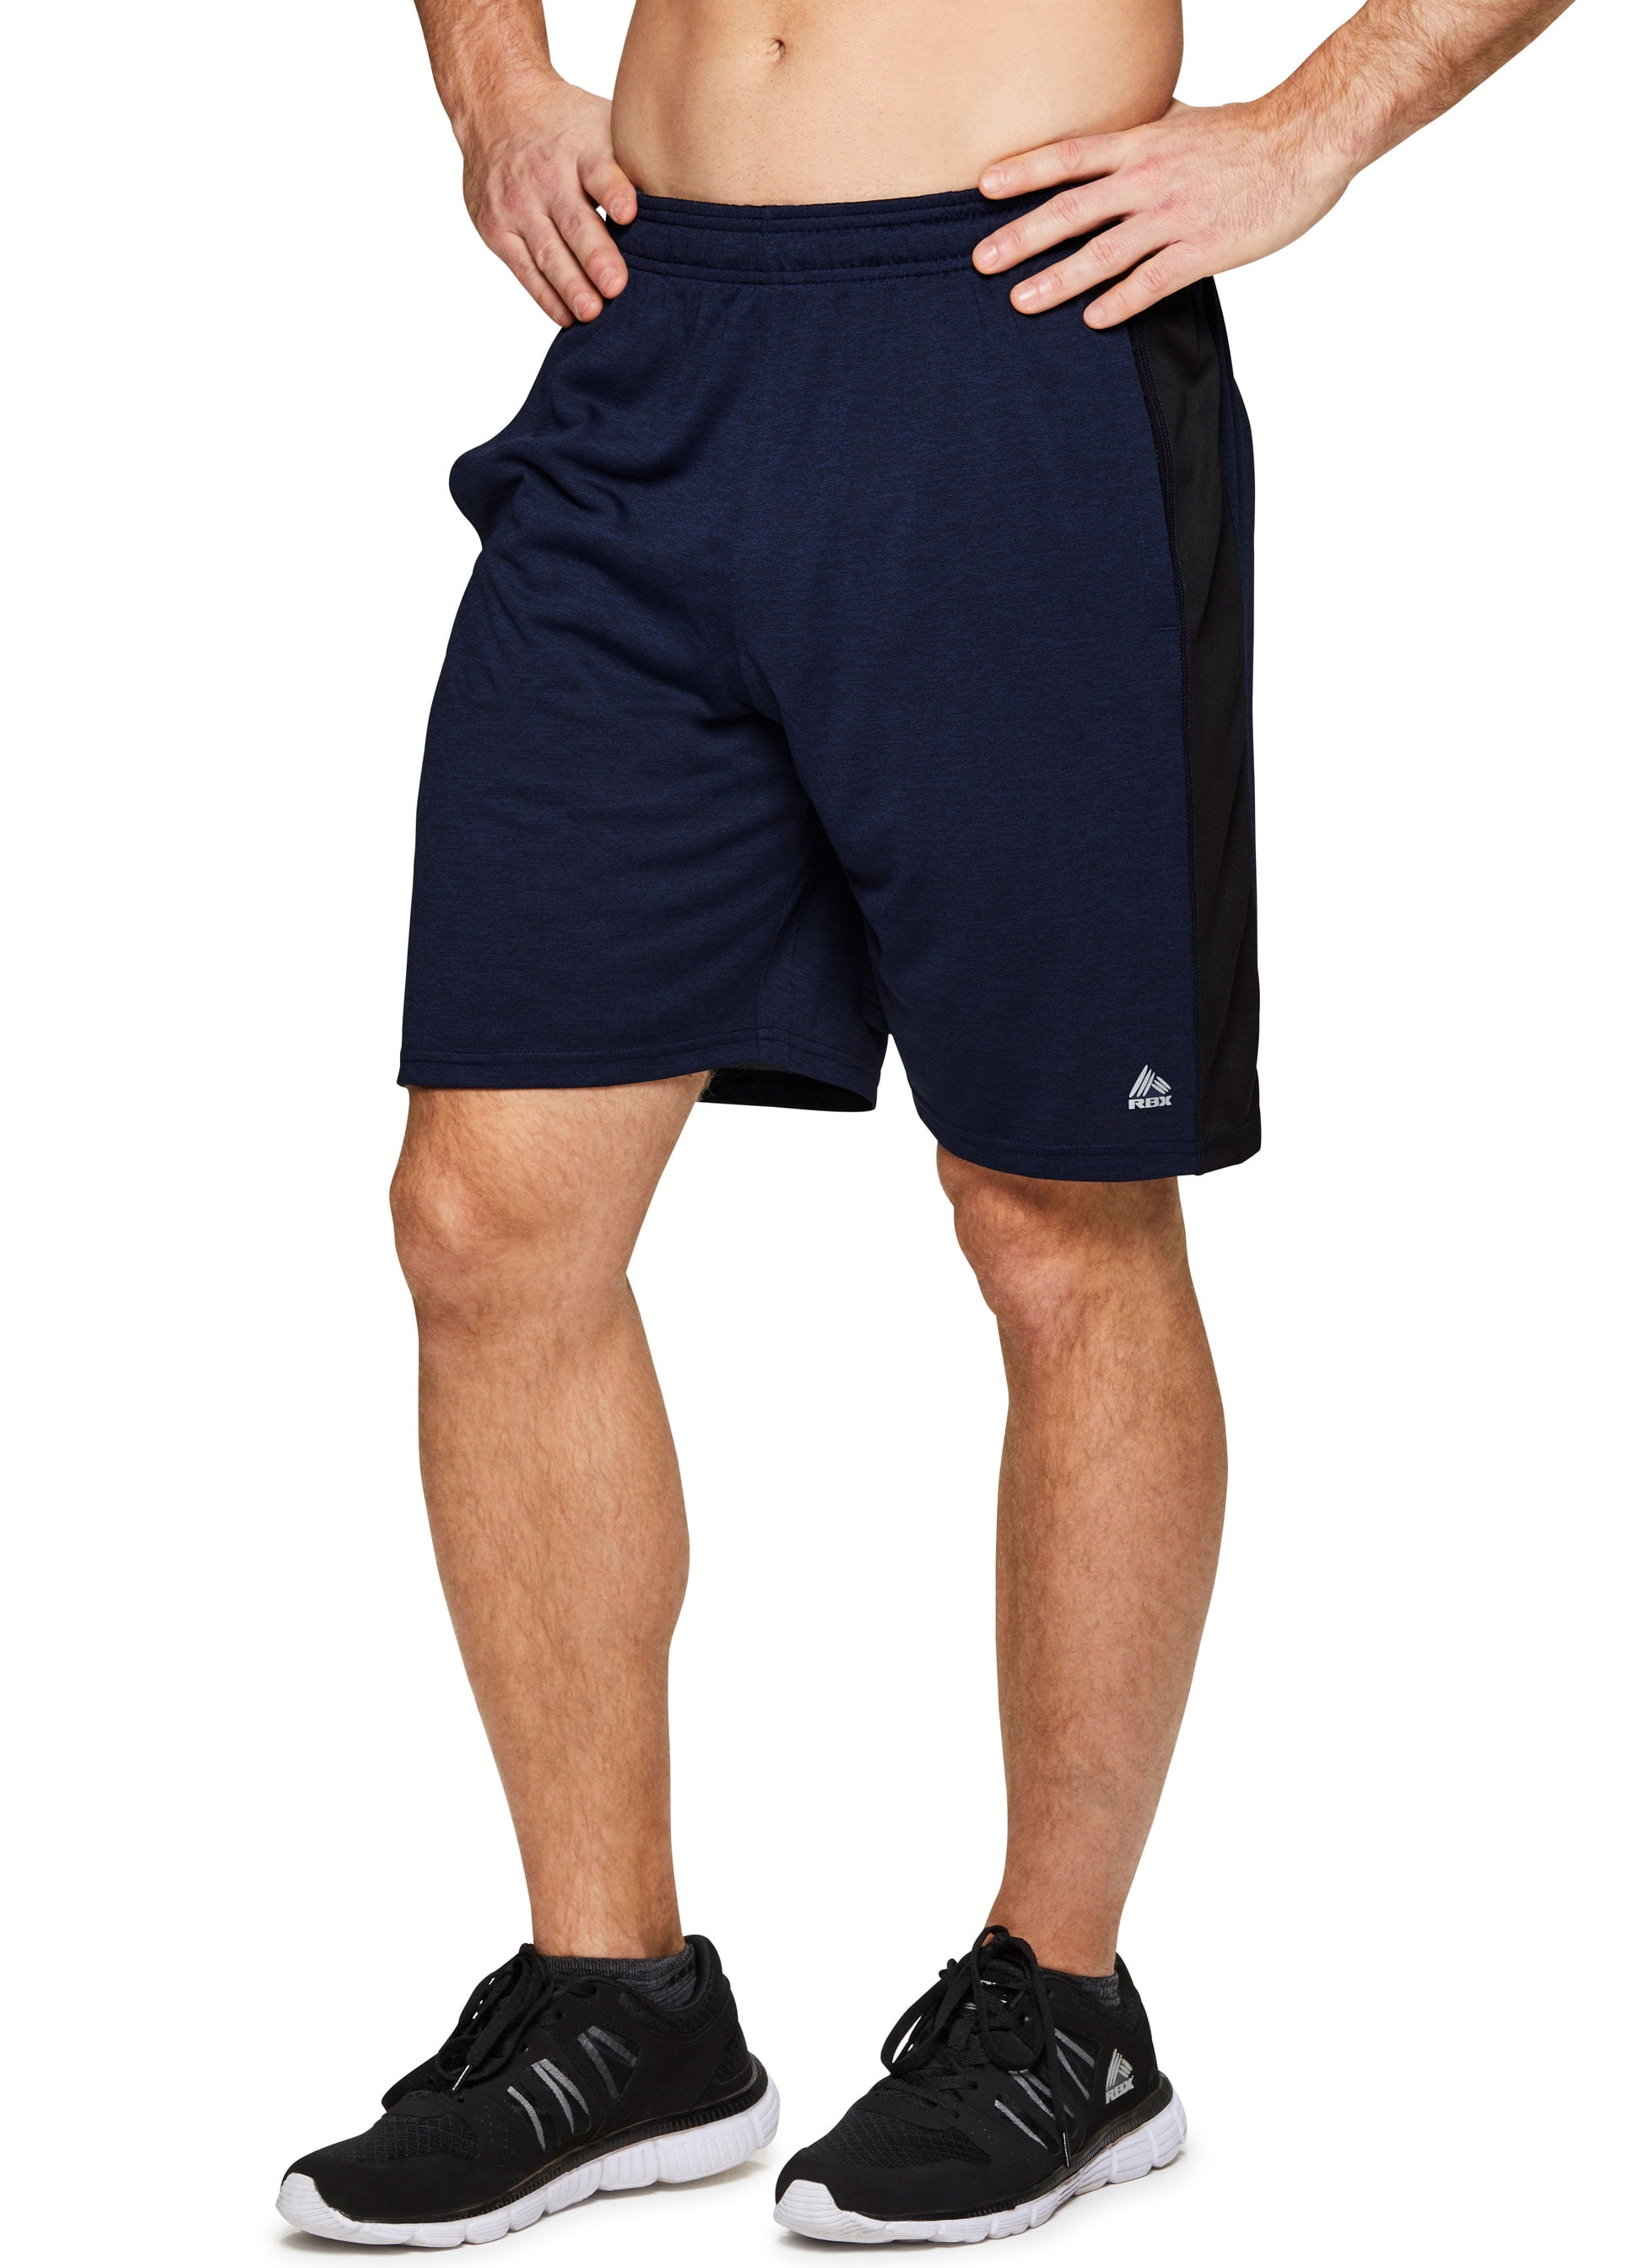 Essentials Men's Double Layered Woven Moisture Wicking Running Shorts Multiple Inseams